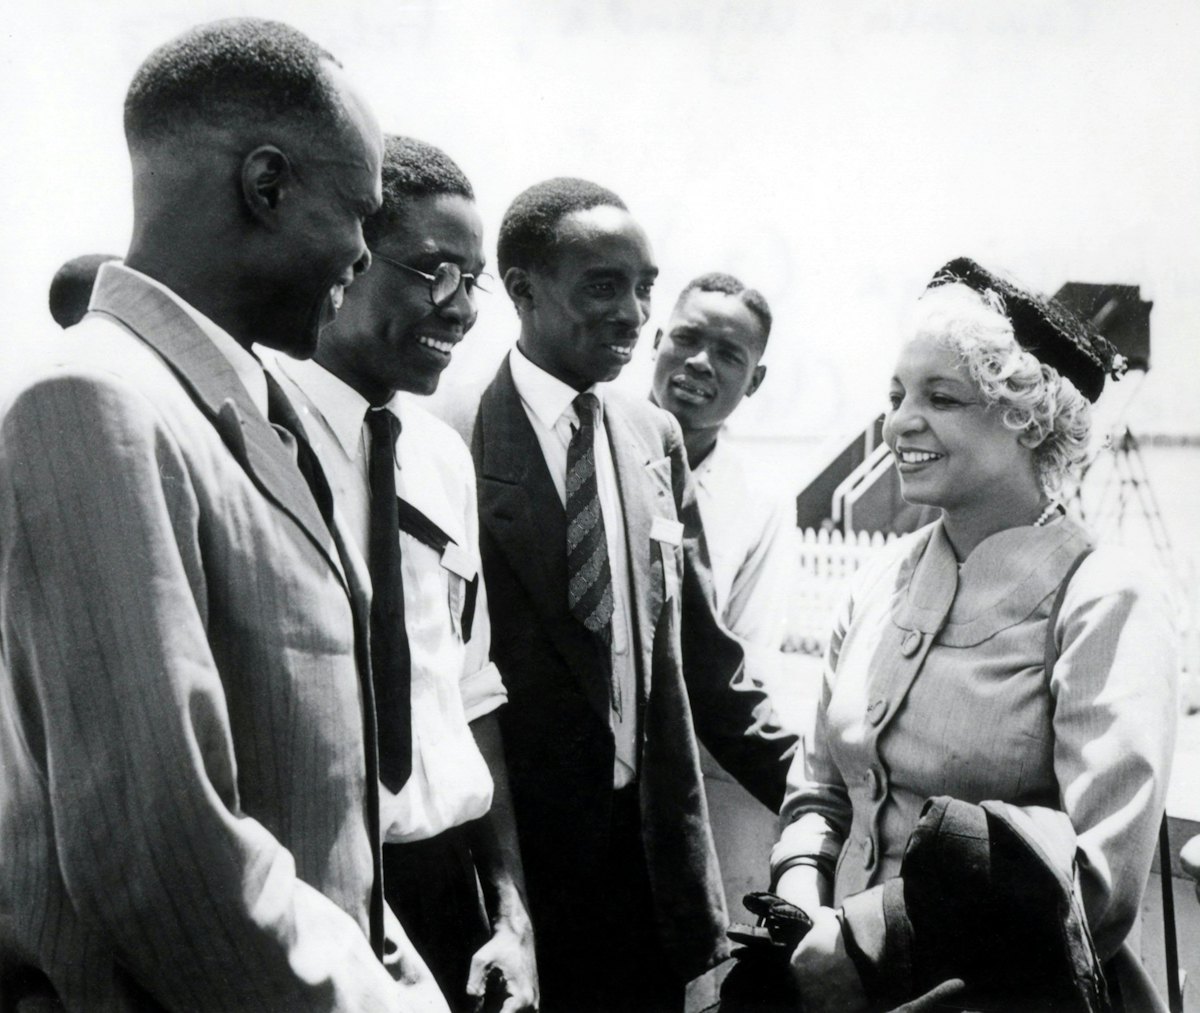 Enoch Olinga, later to be appointed a Hand of the Cause of God (second left), and Elsie Austin (right) with other Baha'is at the African Intercontinental Baha'i Conference, Kampala, Uganda, 1953.